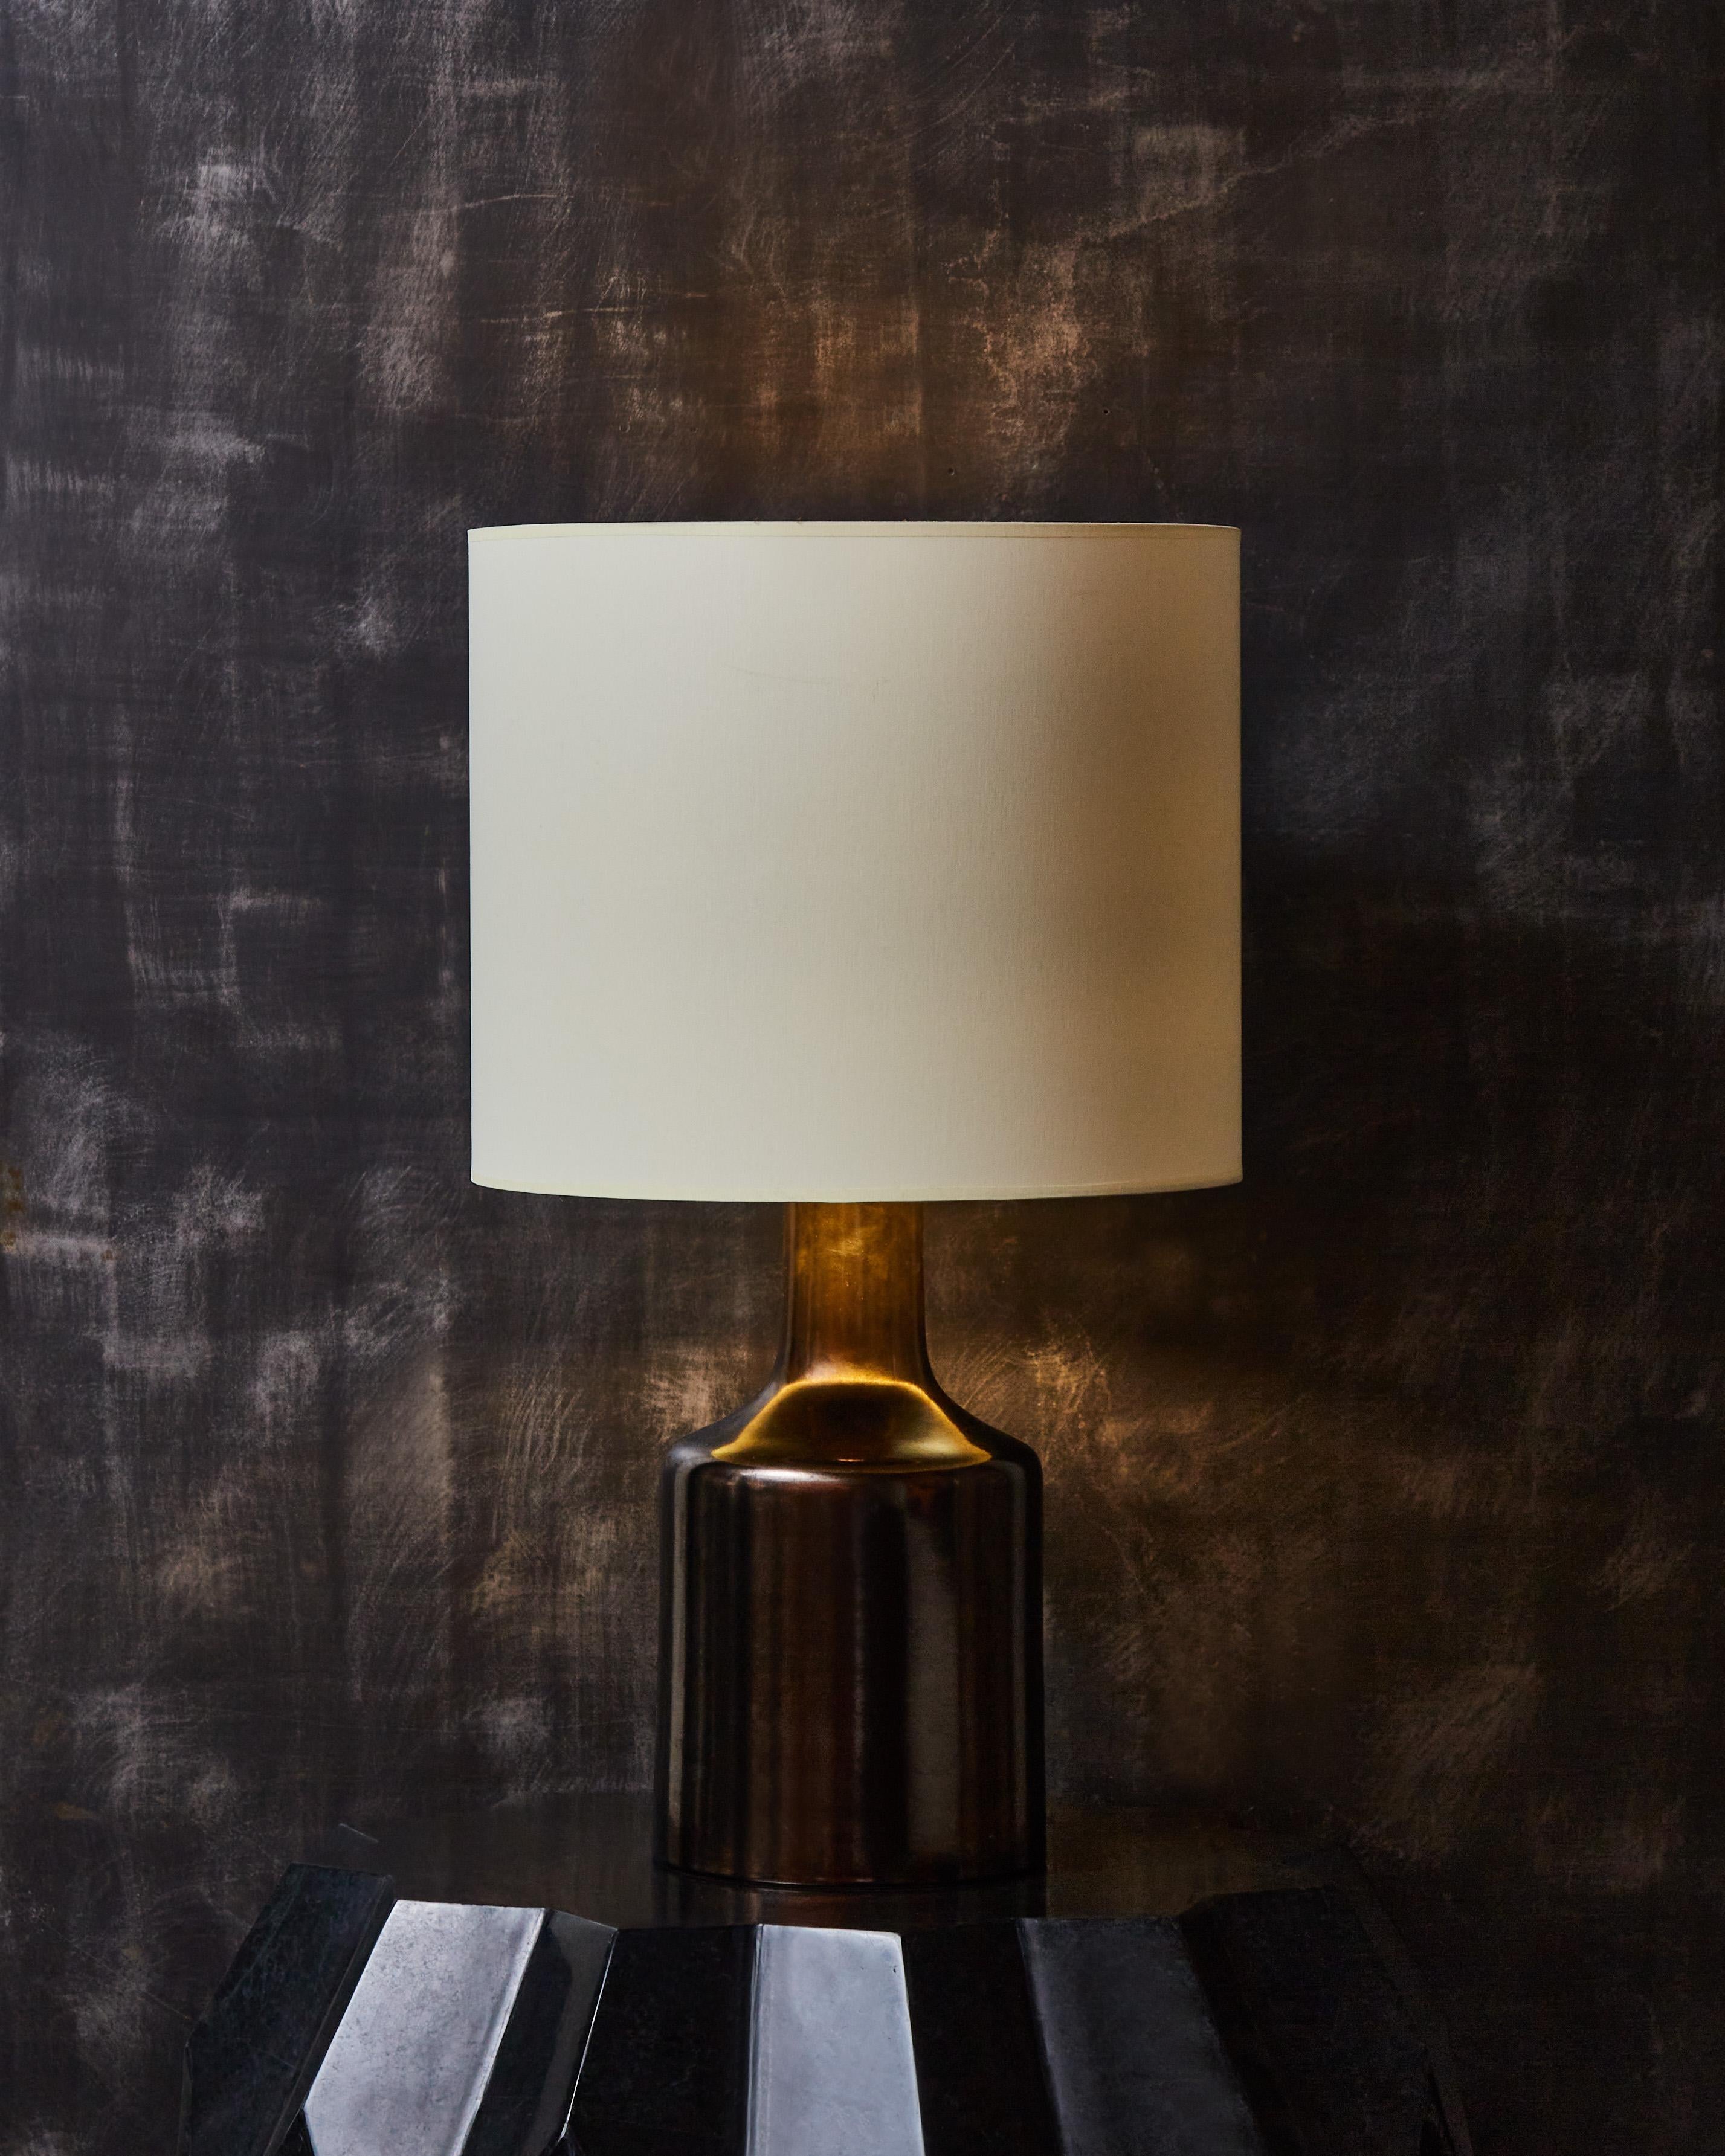 Ceramic table lamp from the 1970s, bottle shaped, covered in a deep dark copper glazed.